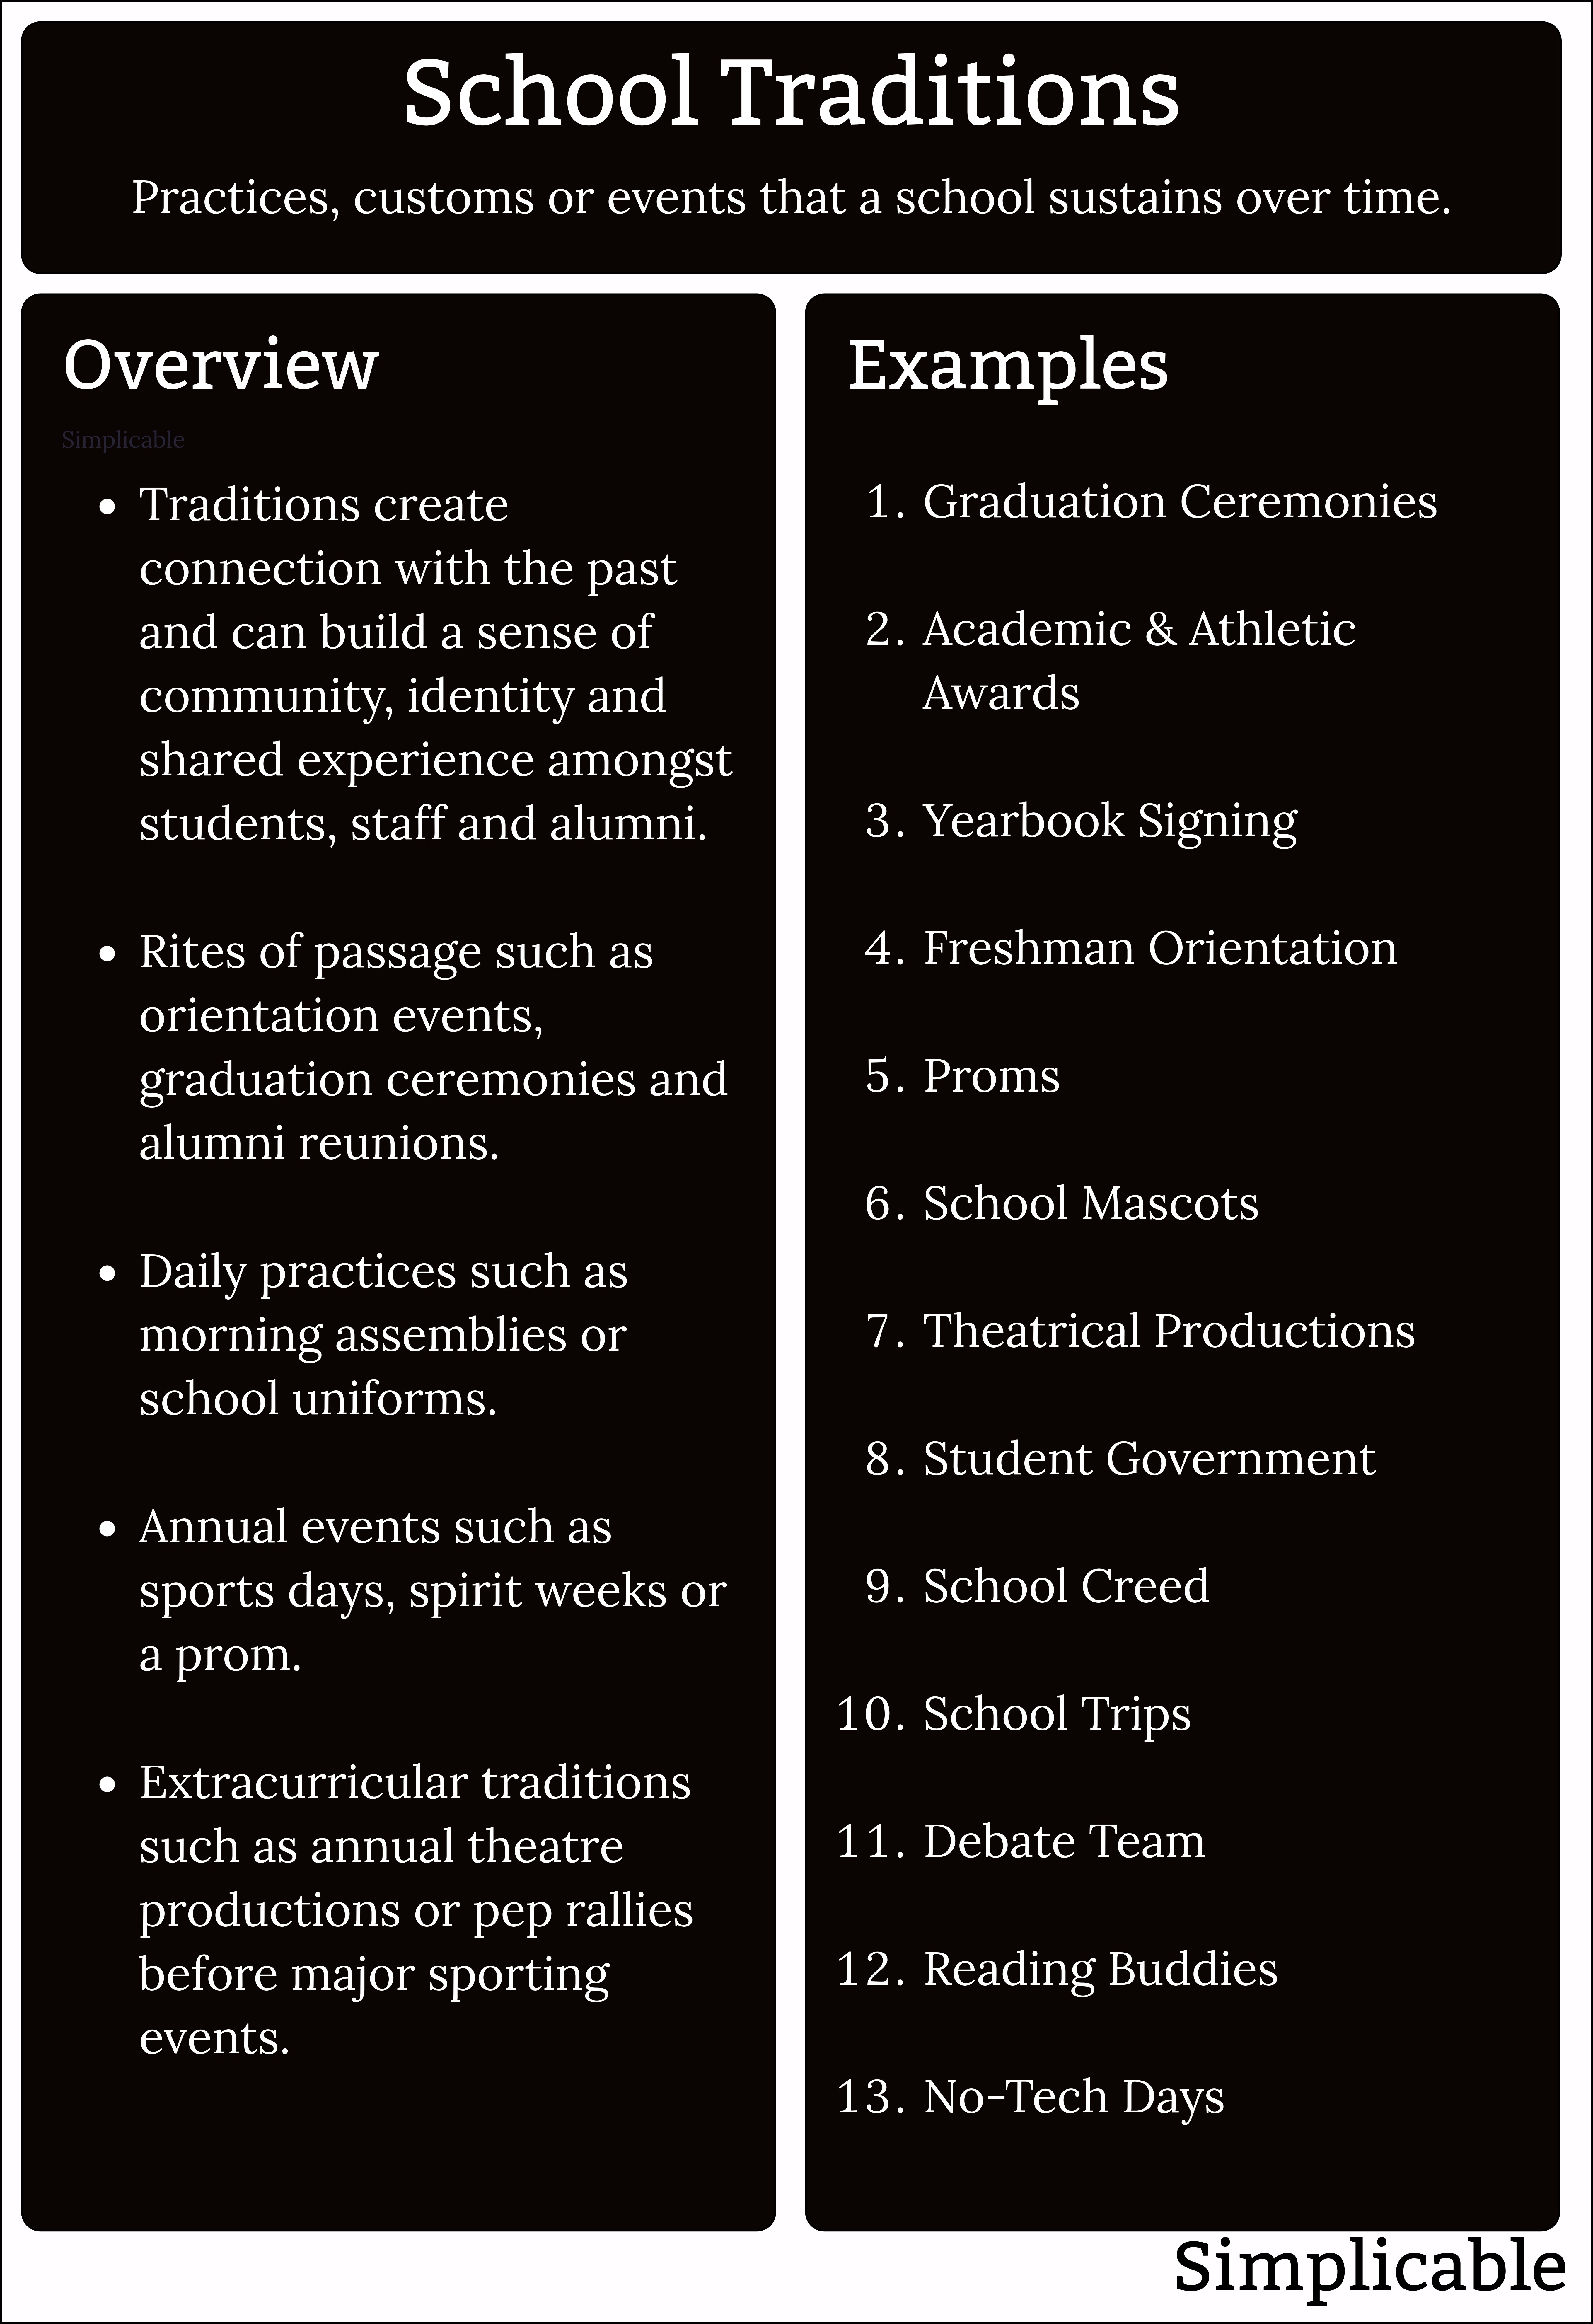 school traditions overview and examples